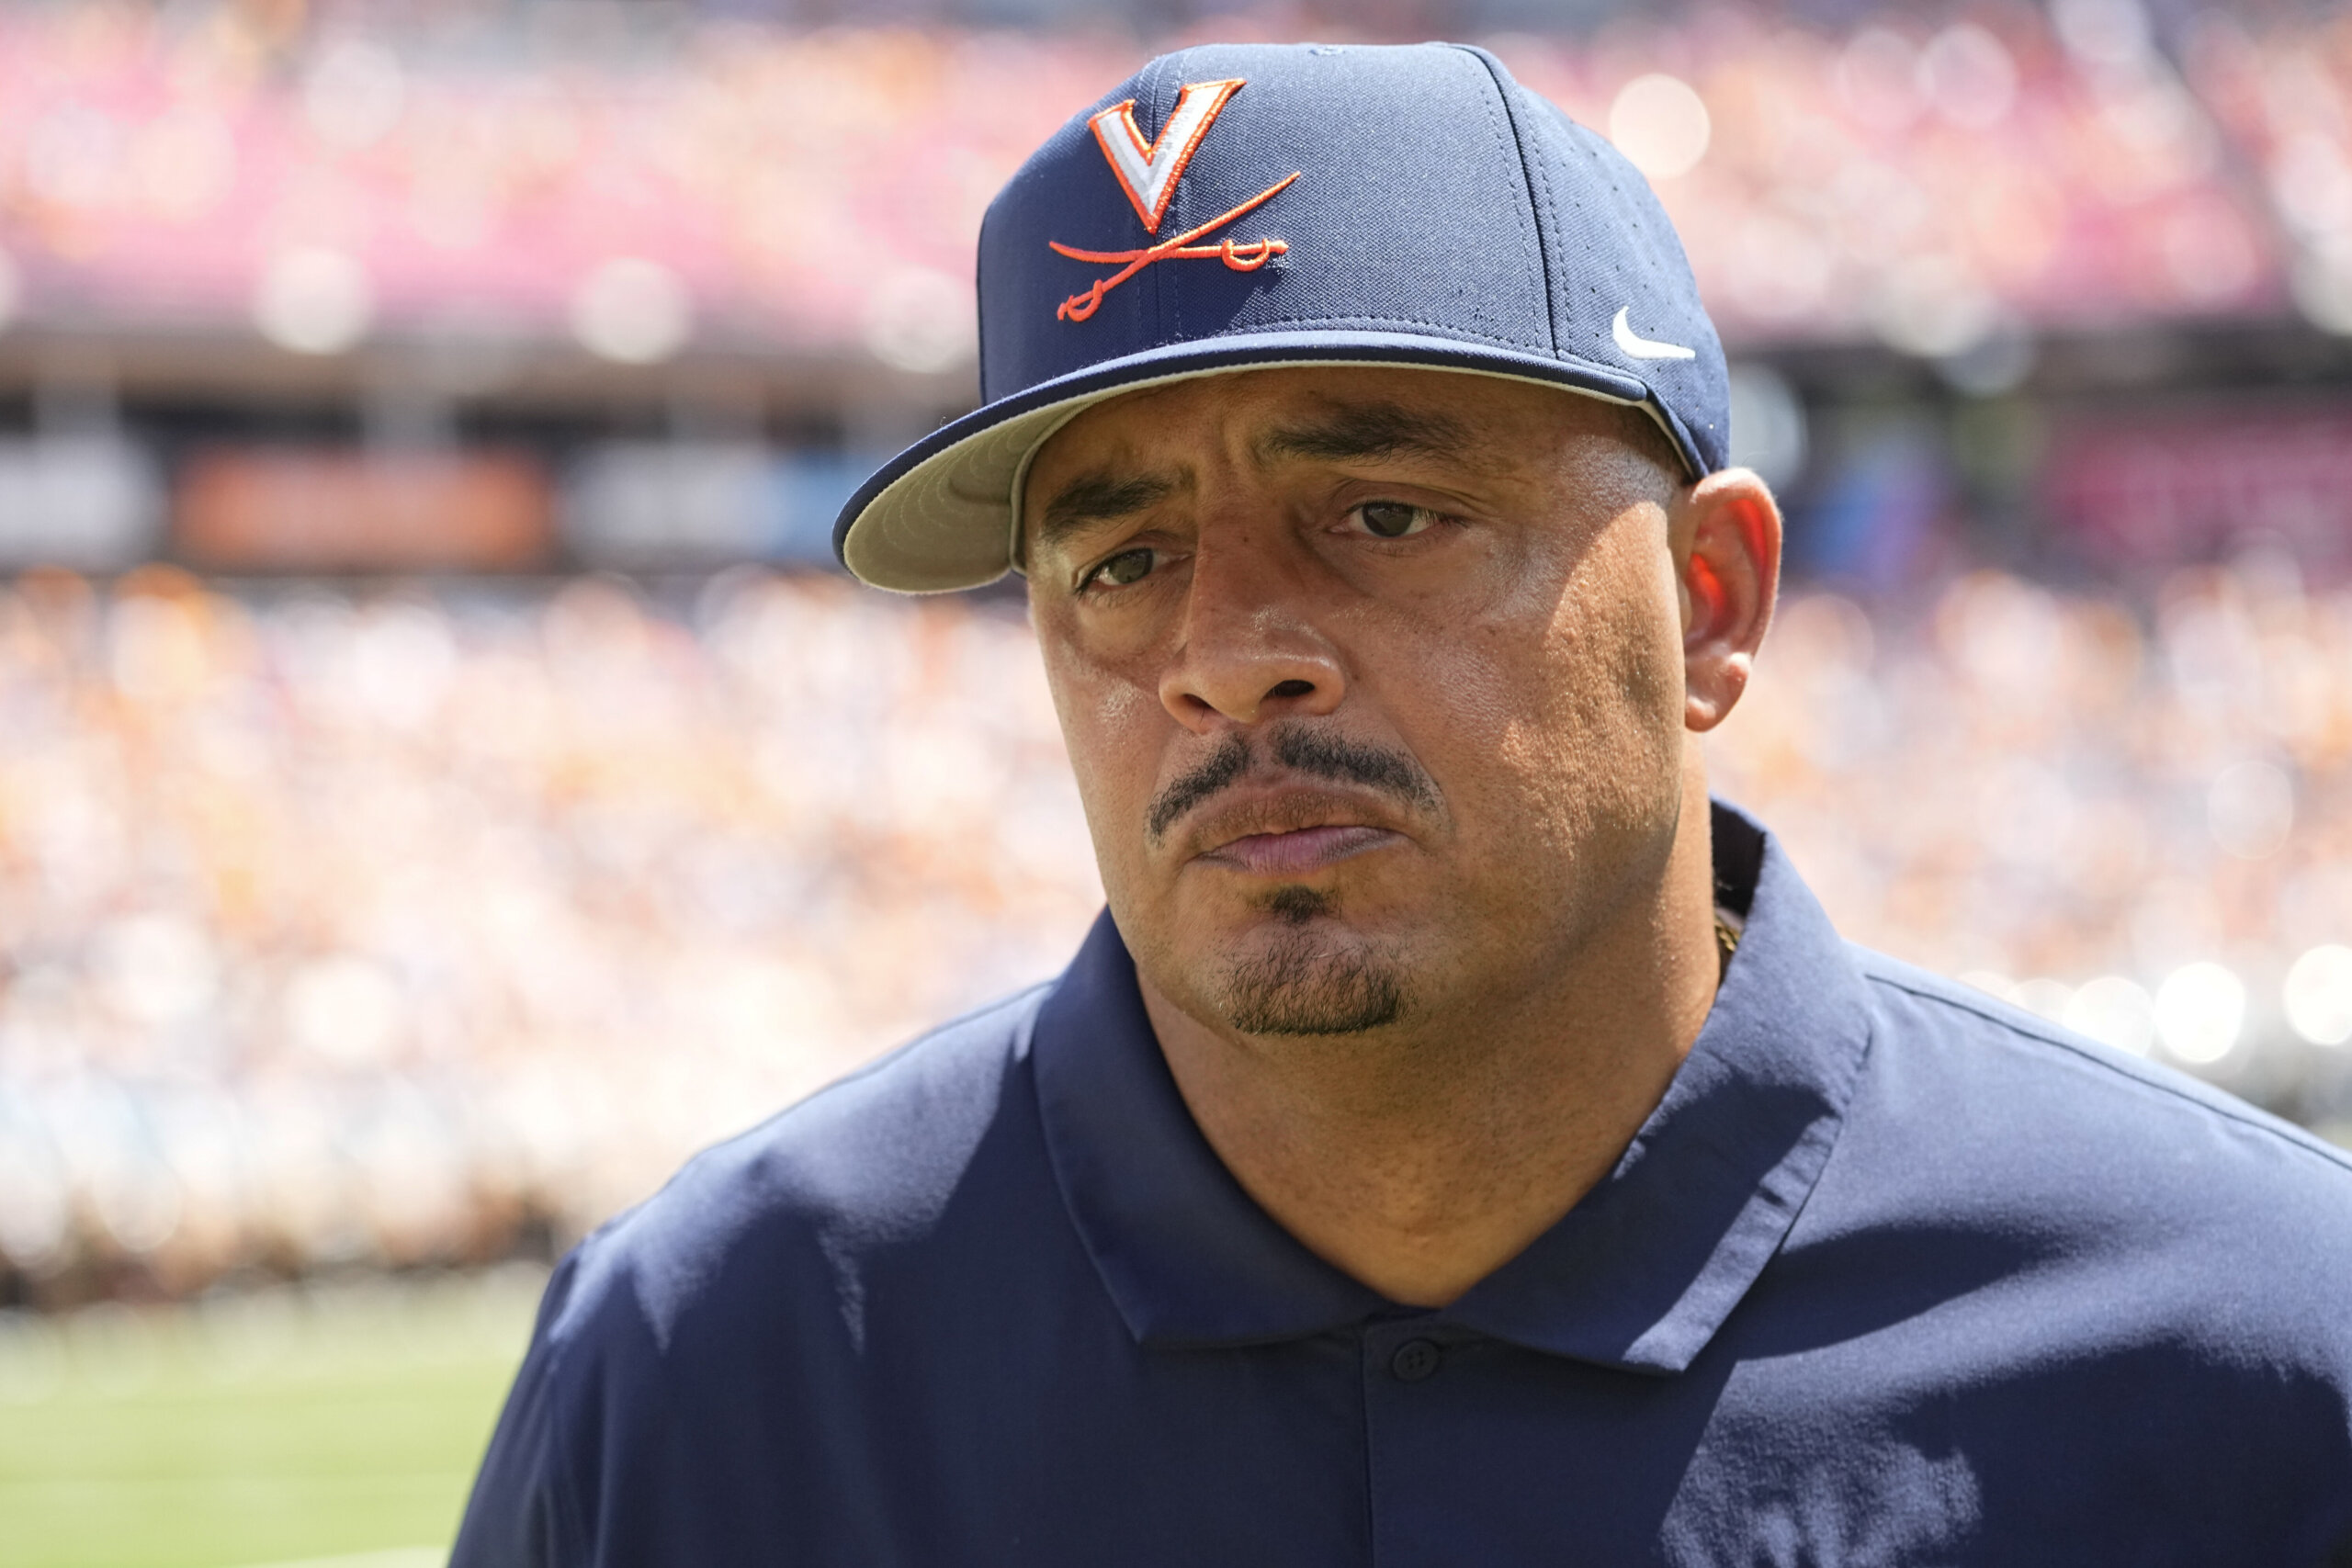 Virginia football will honor fallen players with 'legacy patches' on jerseys